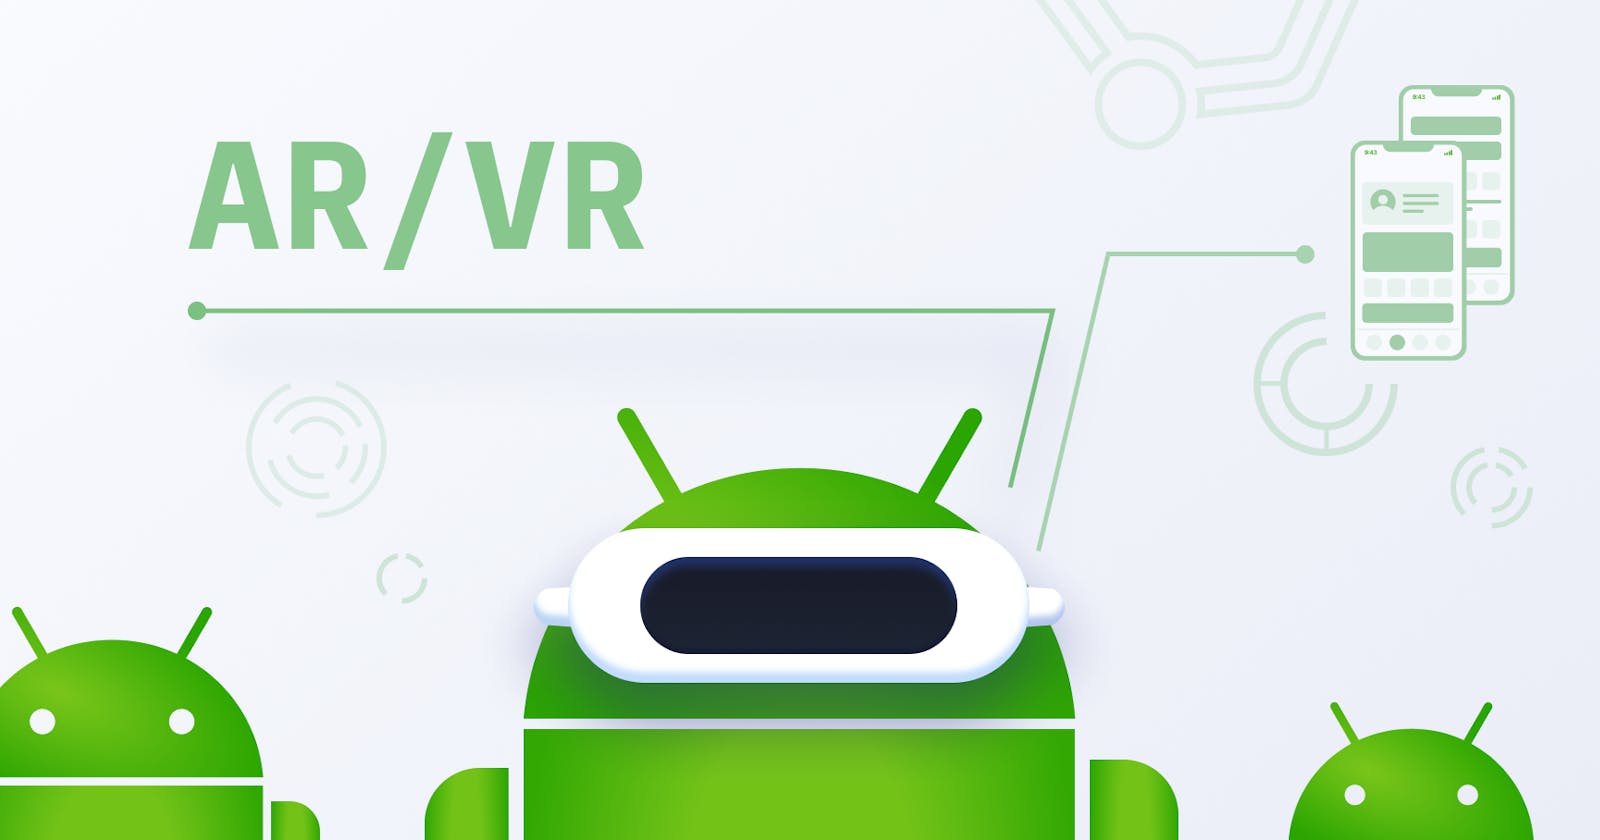 Guide for Android AR development: overview, tools, tips